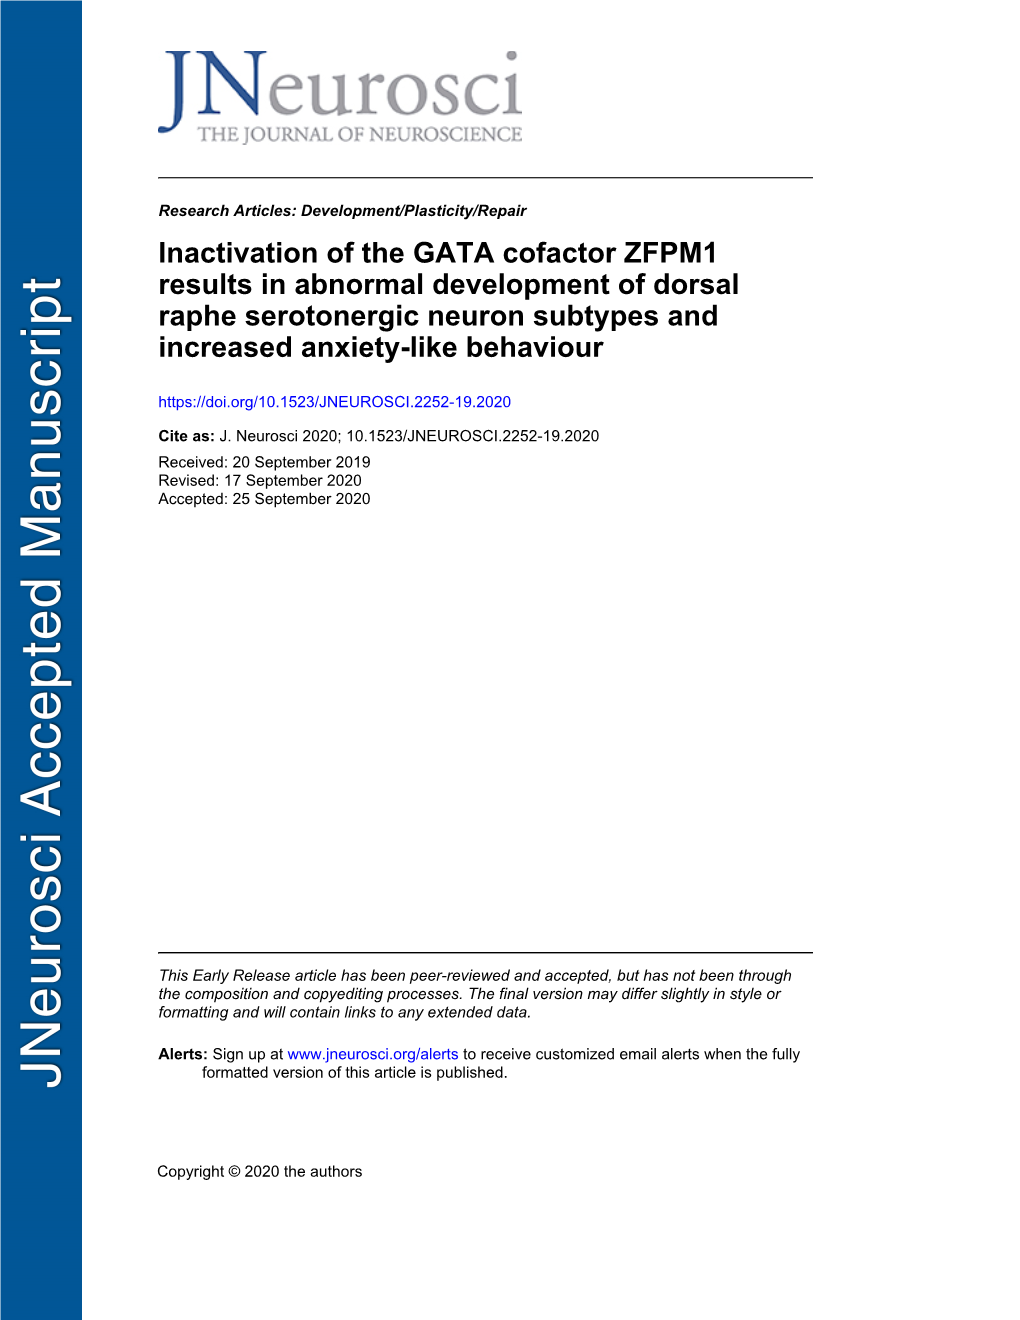 Inactivation of the GATA Cofactor ZFPM1 Results in Abnormal